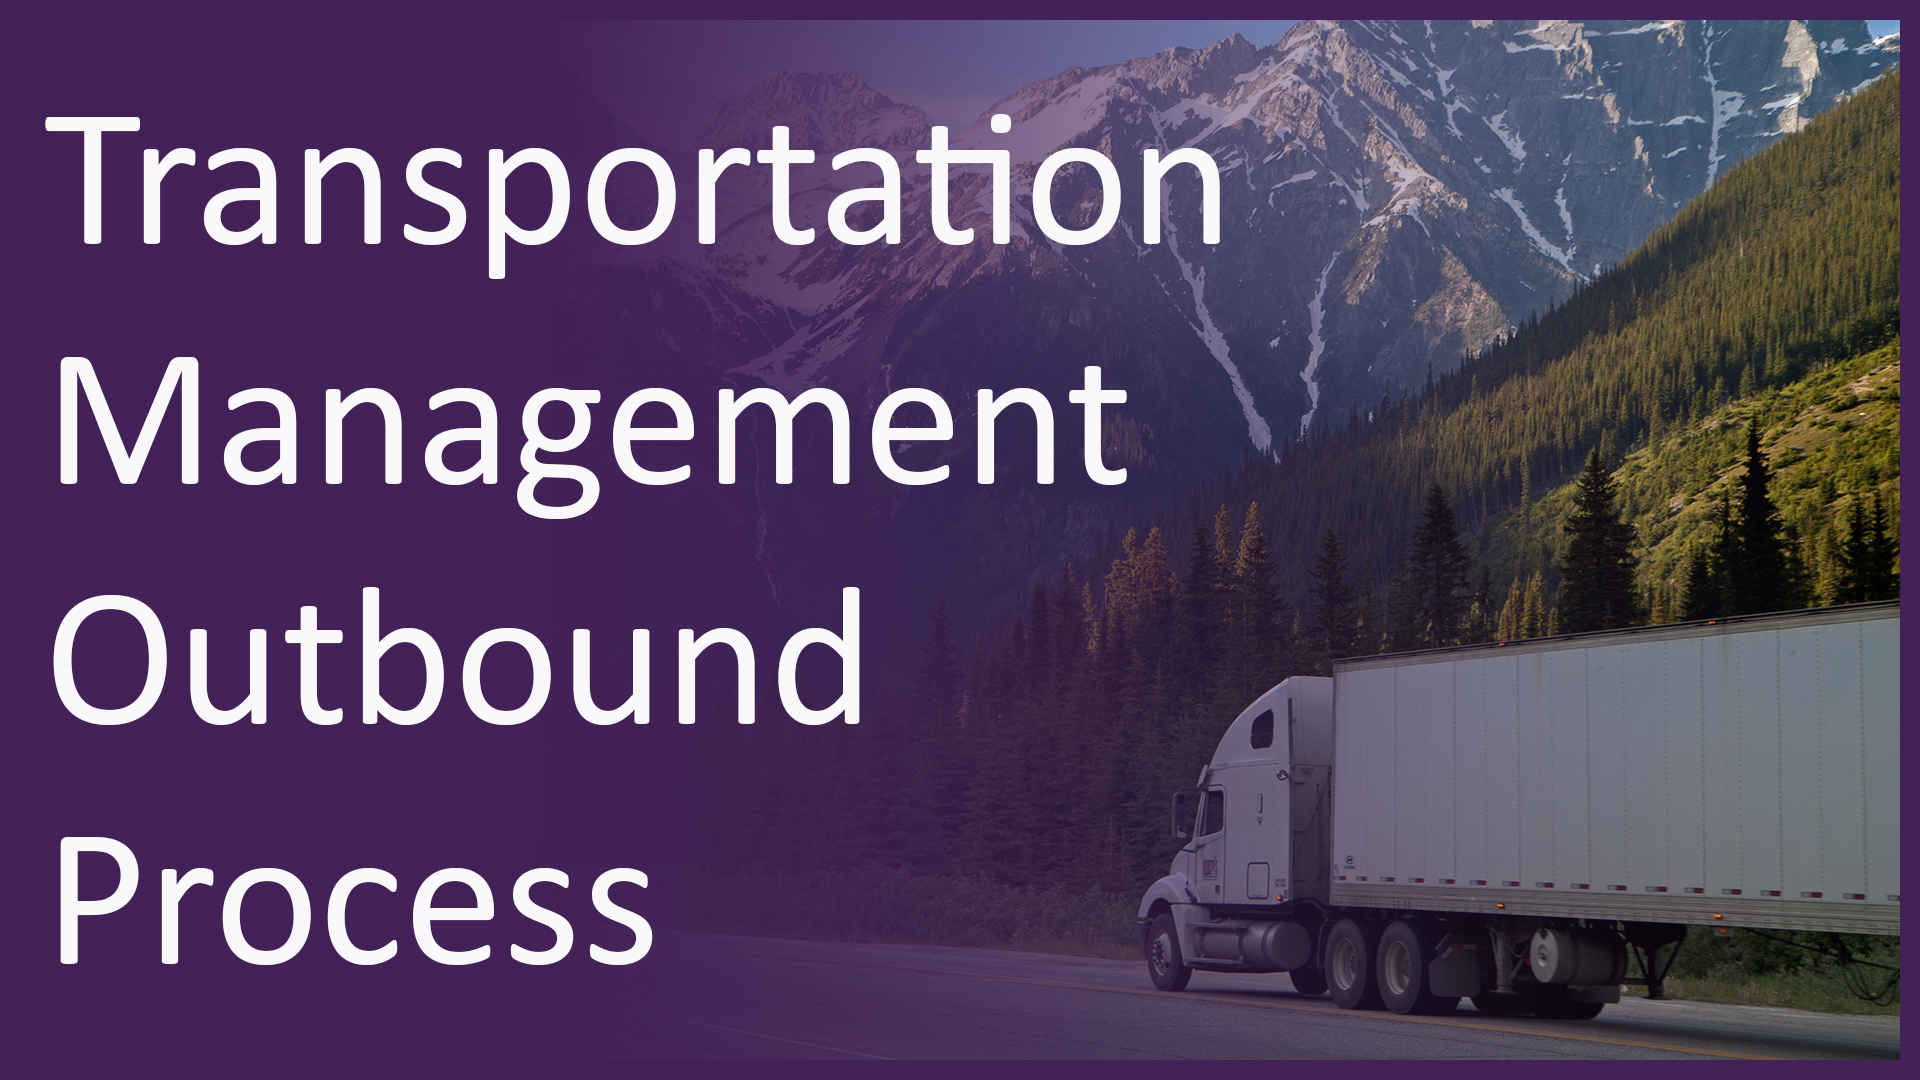 You are currently viewing Transportation Management Outbound Process